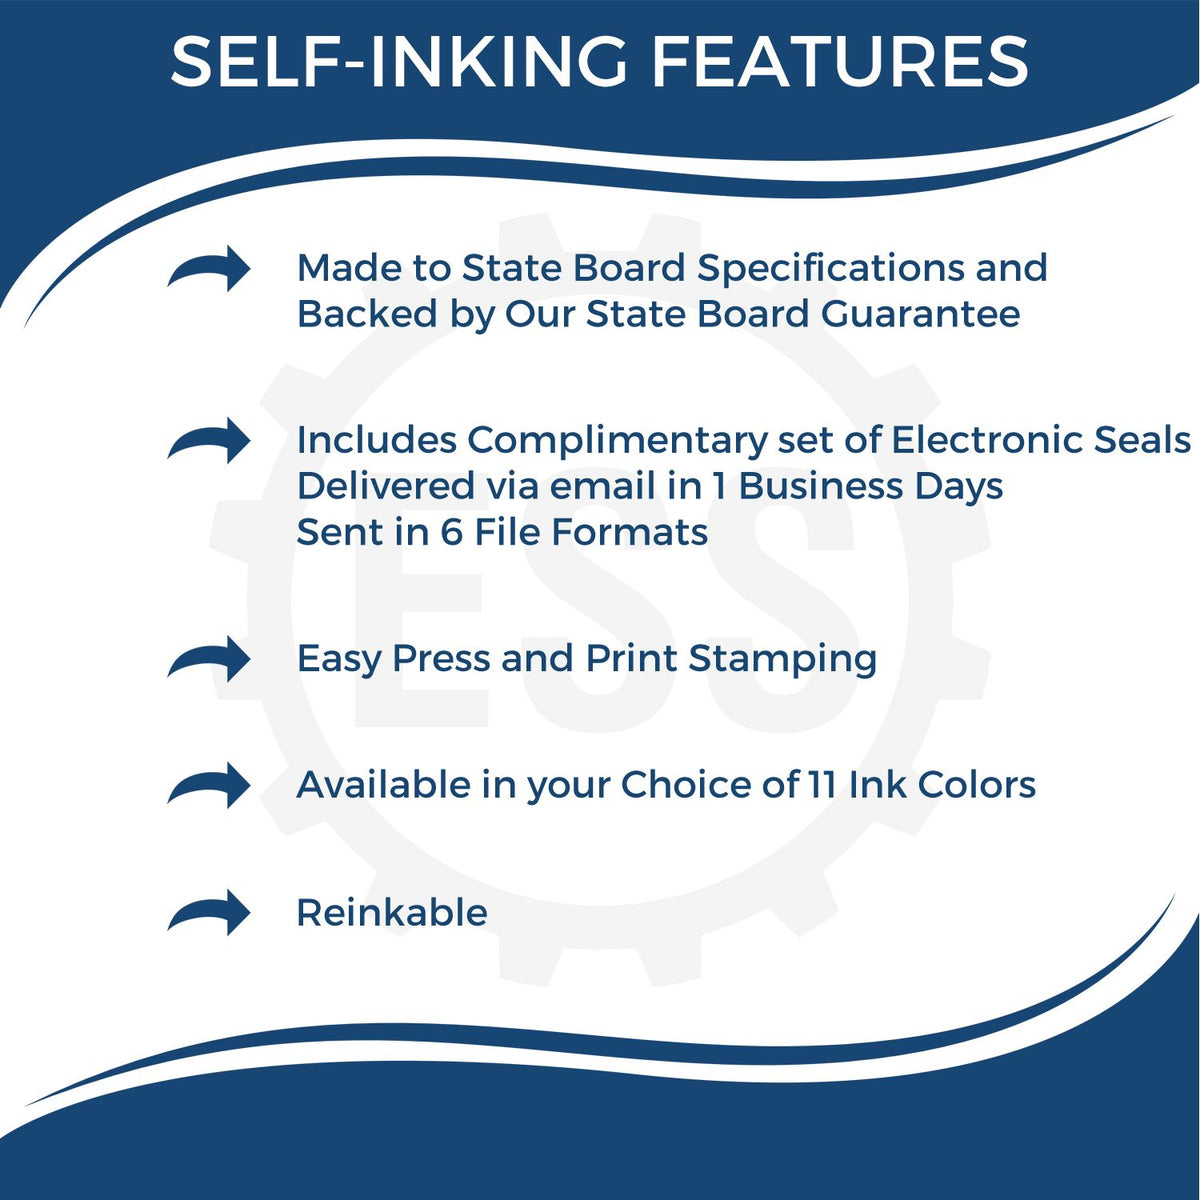 A picture of an infographic highlighting the selling points for the Self-Inking Florida Landscape Architect Stamp